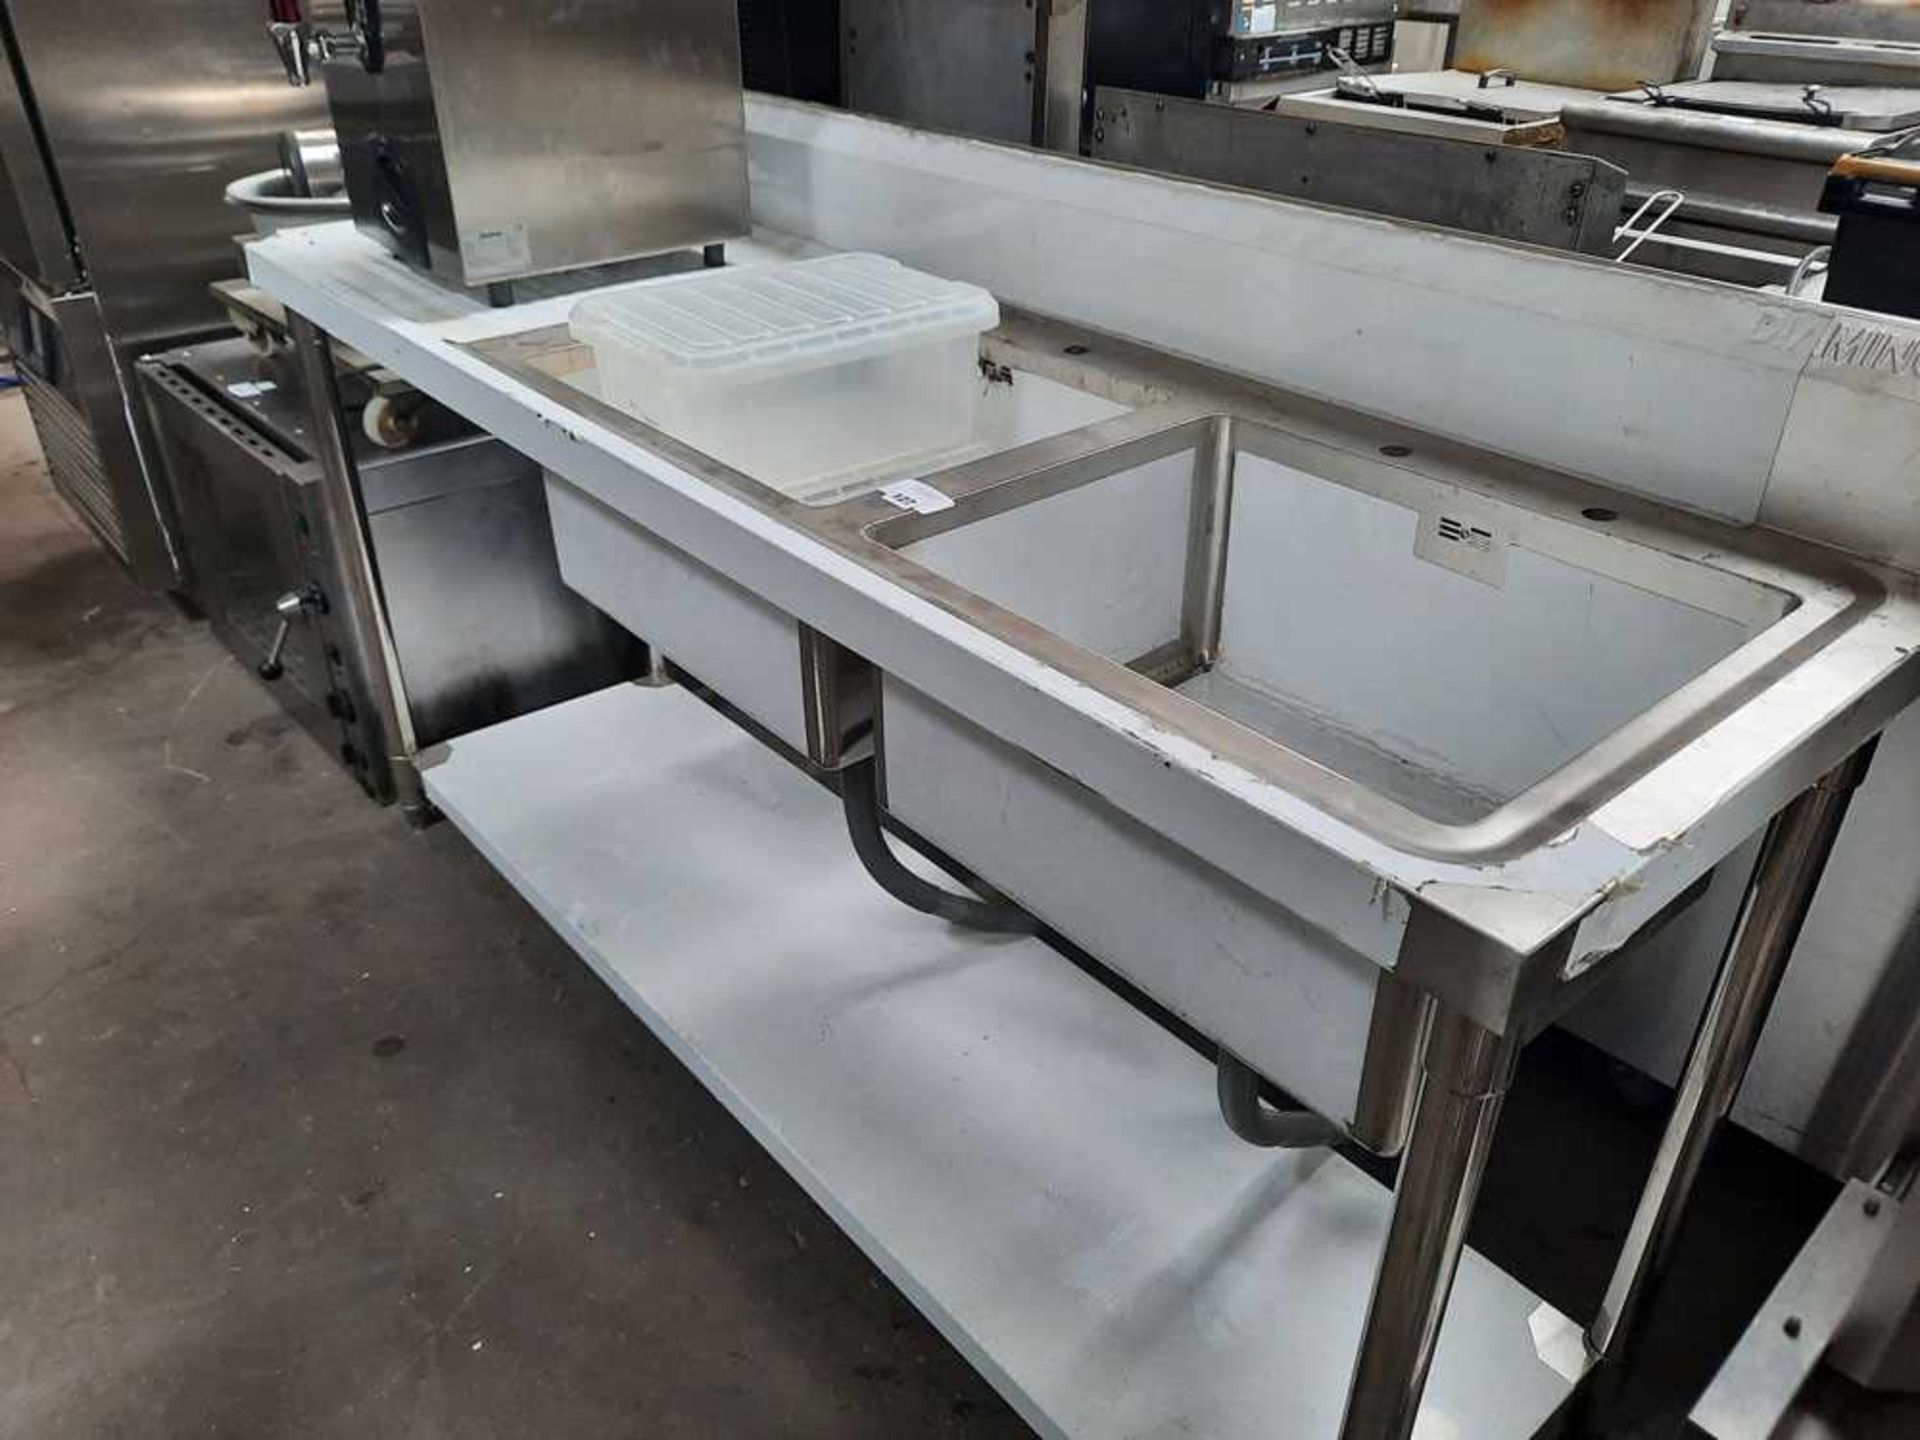 +VAT 180cm two bowl stainless steel sink with draining board and shelf under